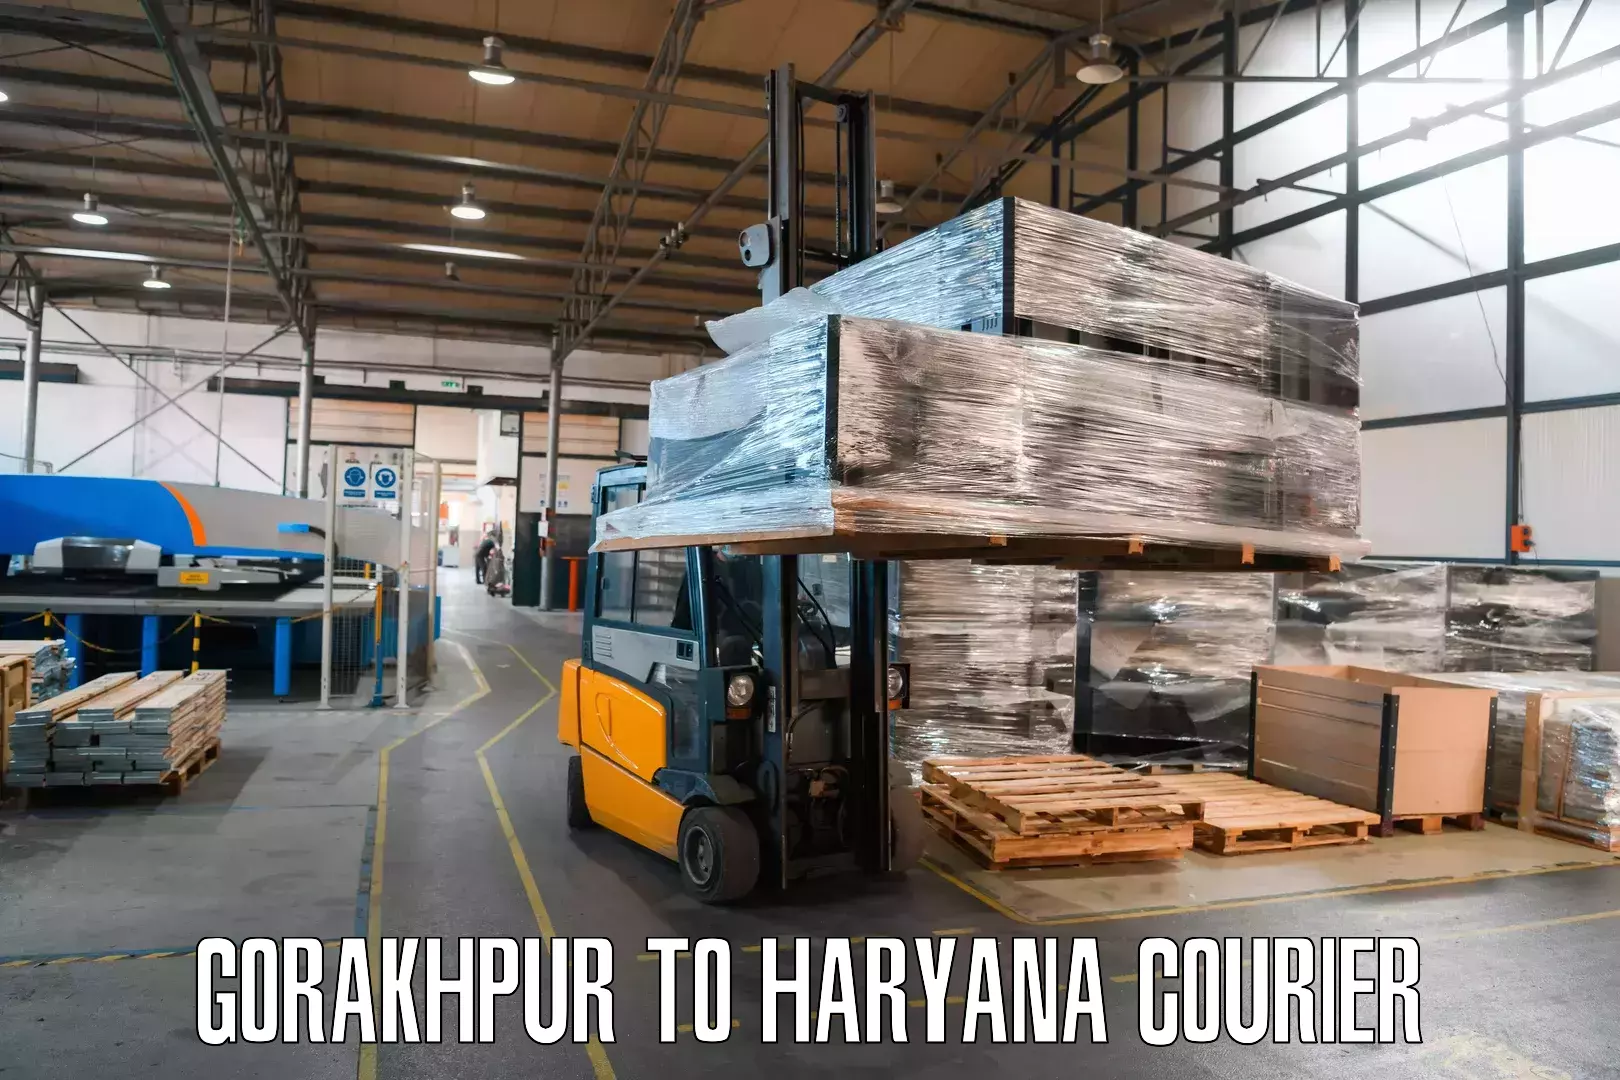 Courier service booking Gorakhpur to Fatehabad